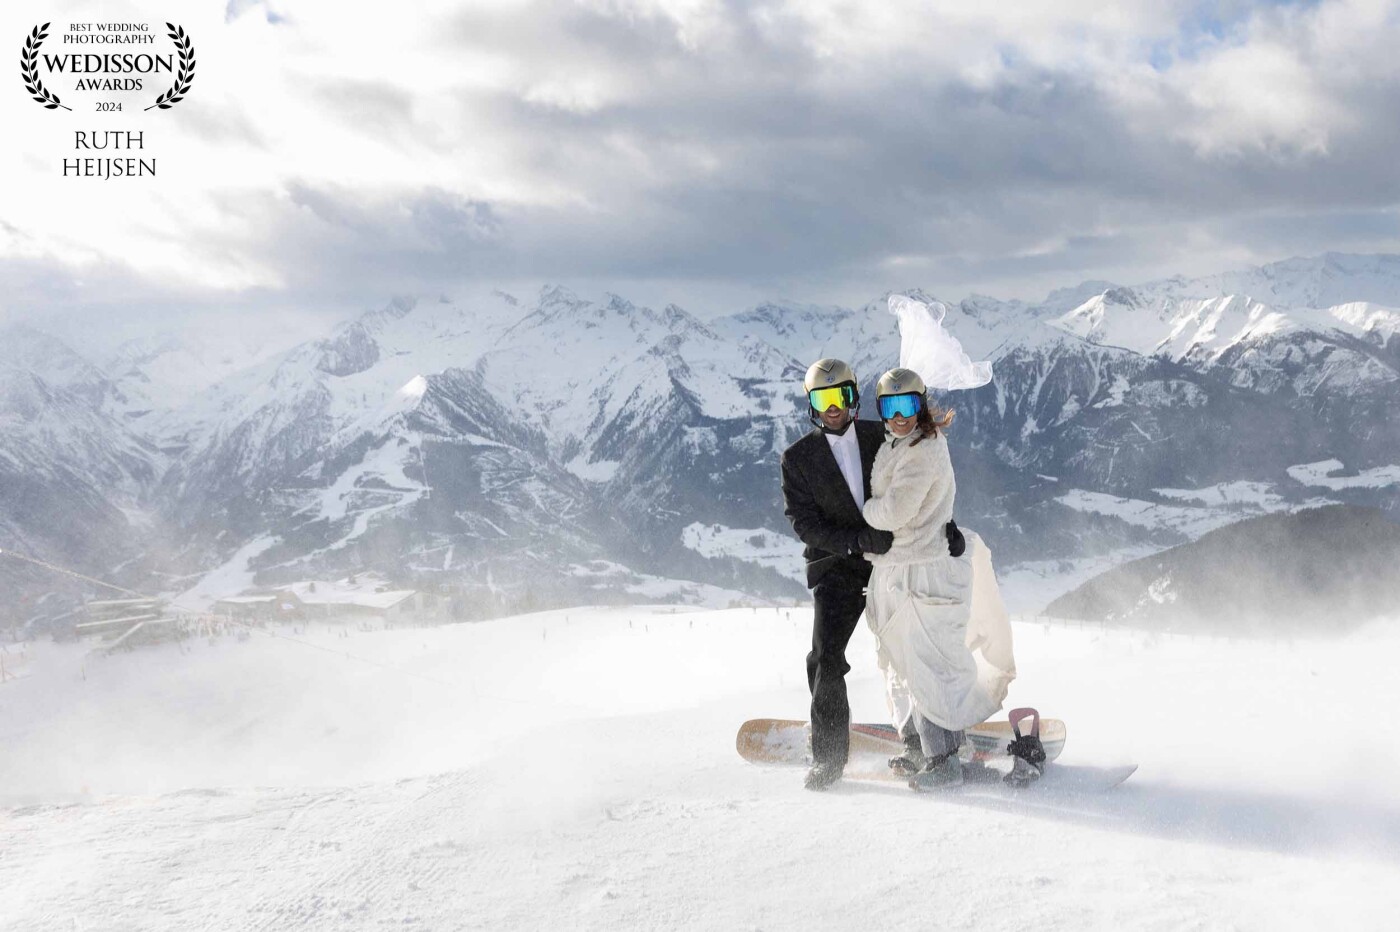 At the pinnacle of love and altitude, the bride and groom embrace each other on their snowboards a the top of this majestic mountain in Austria, overlooking the vast expanse of the Alps. Battling the gusty winds, the snow dances around them, lifting the bride's veil skyward. In this breathtaking moment, amidst the swirling snow, the couple holds tight, savoring not only the thrill of the mountain descent but also the panoramic beauty that love and adventure bring.